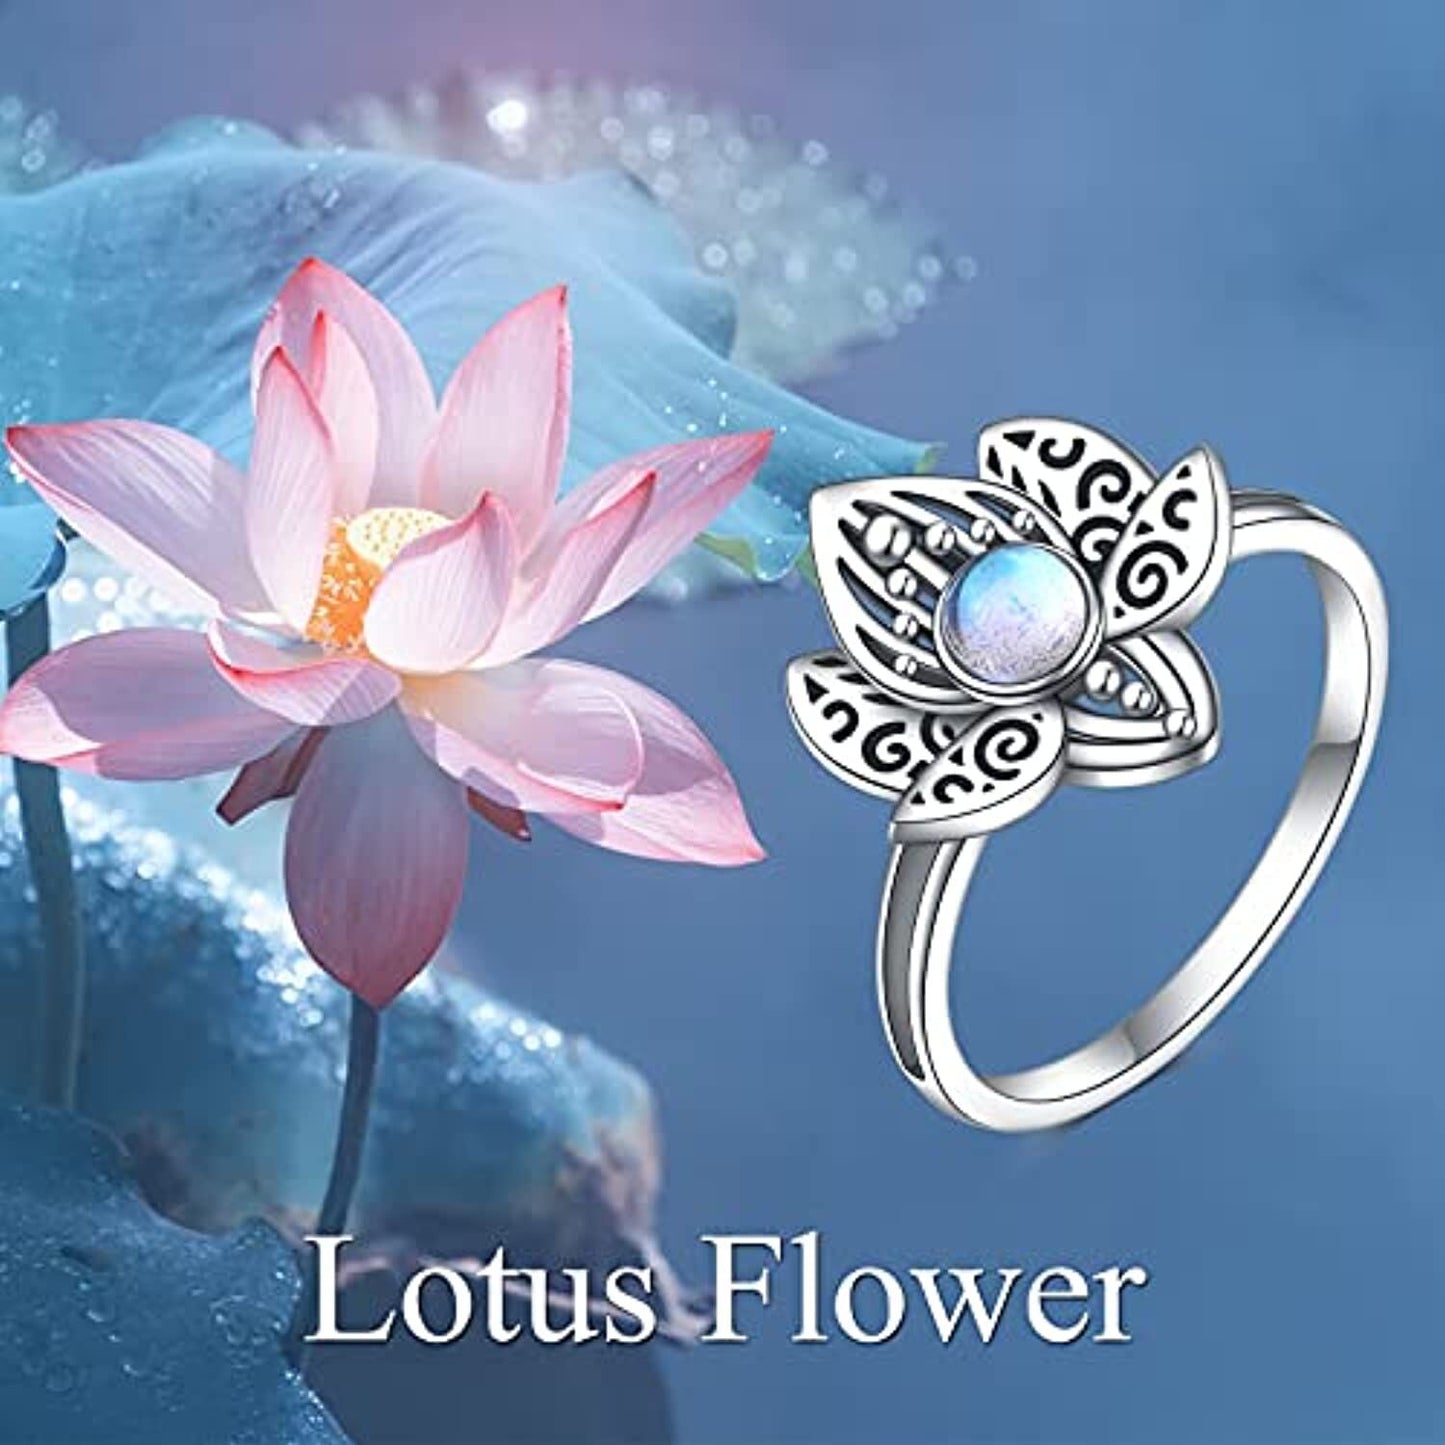 Lotus Flower Ring Sterling Silver Jewelry Gifts for Women - silver